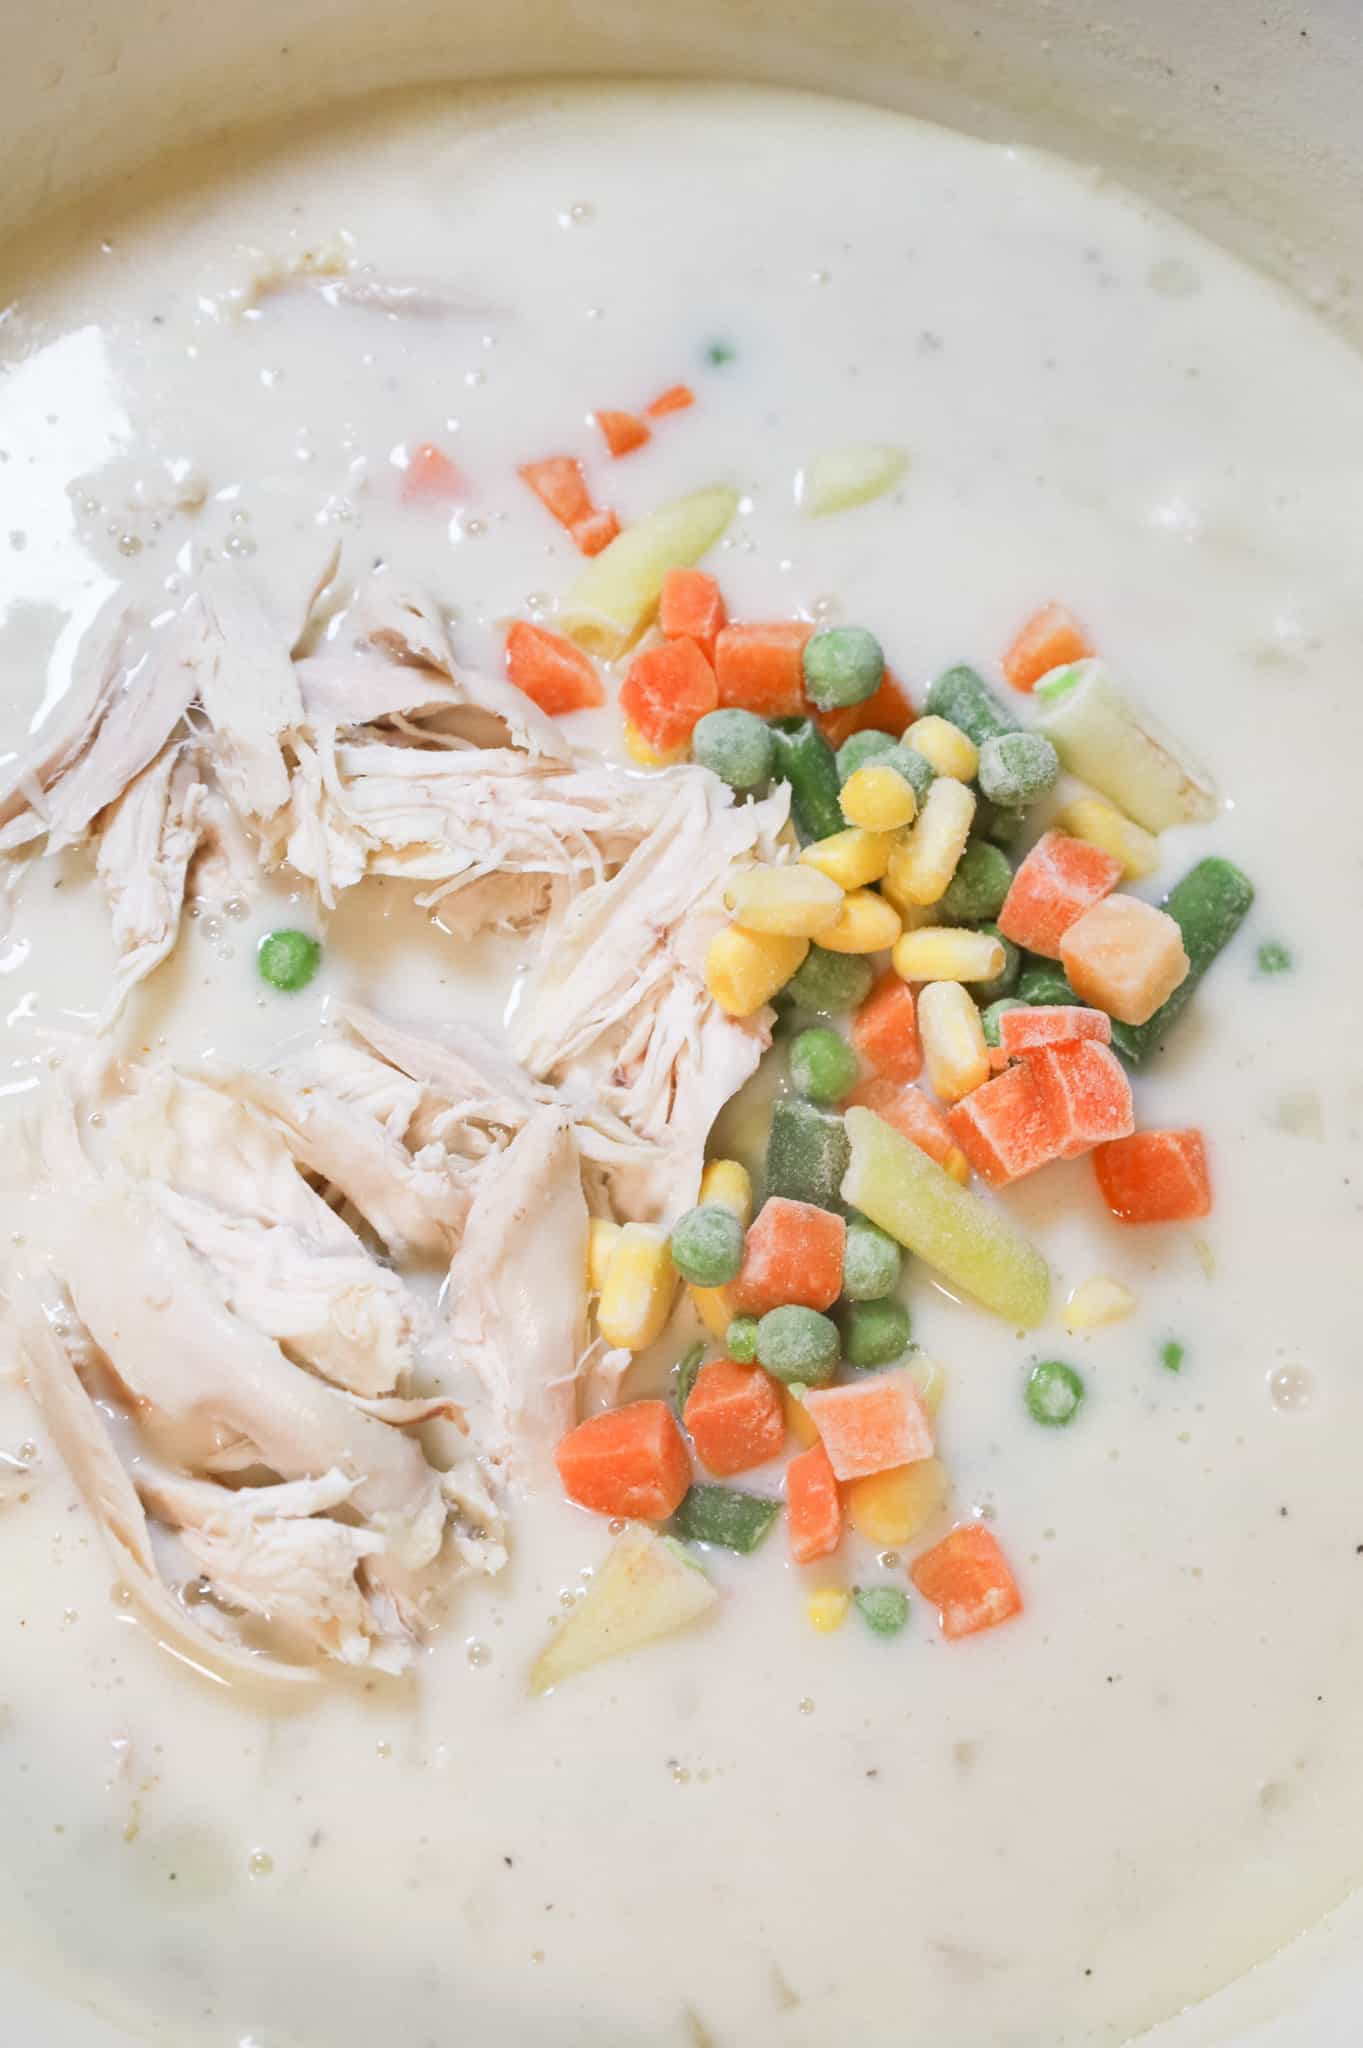 frozen mixed vegetables and shredded chicken added to cream soup